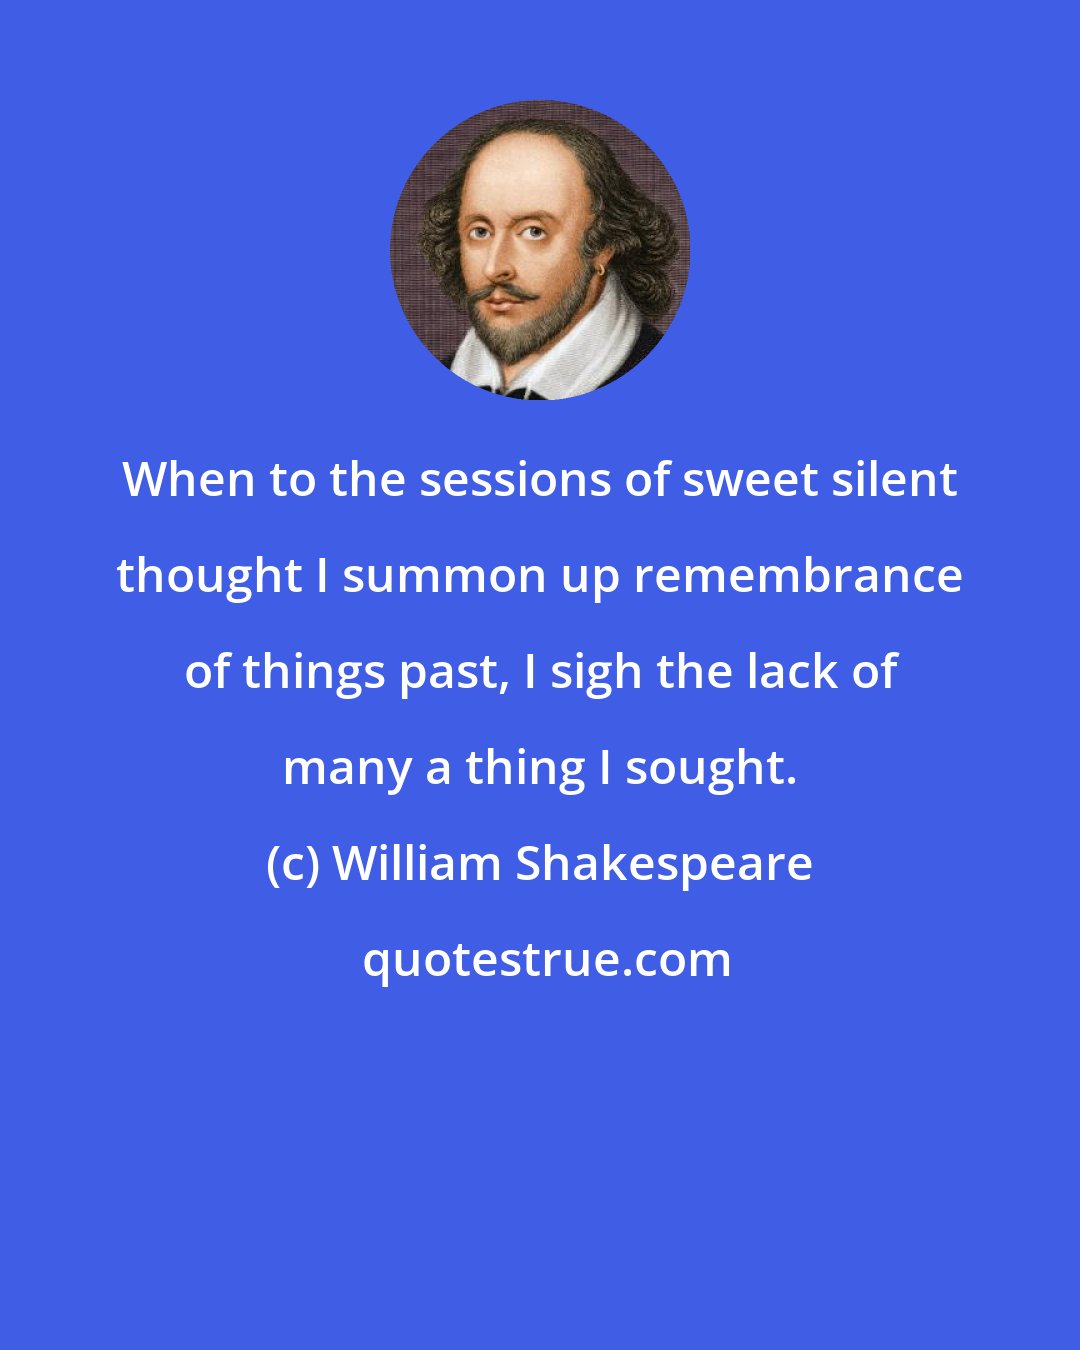 William Shakespeare: When to the sessions of sweet silent thought I summon up remembrance of things past, I sigh the lack of many a thing I sought.